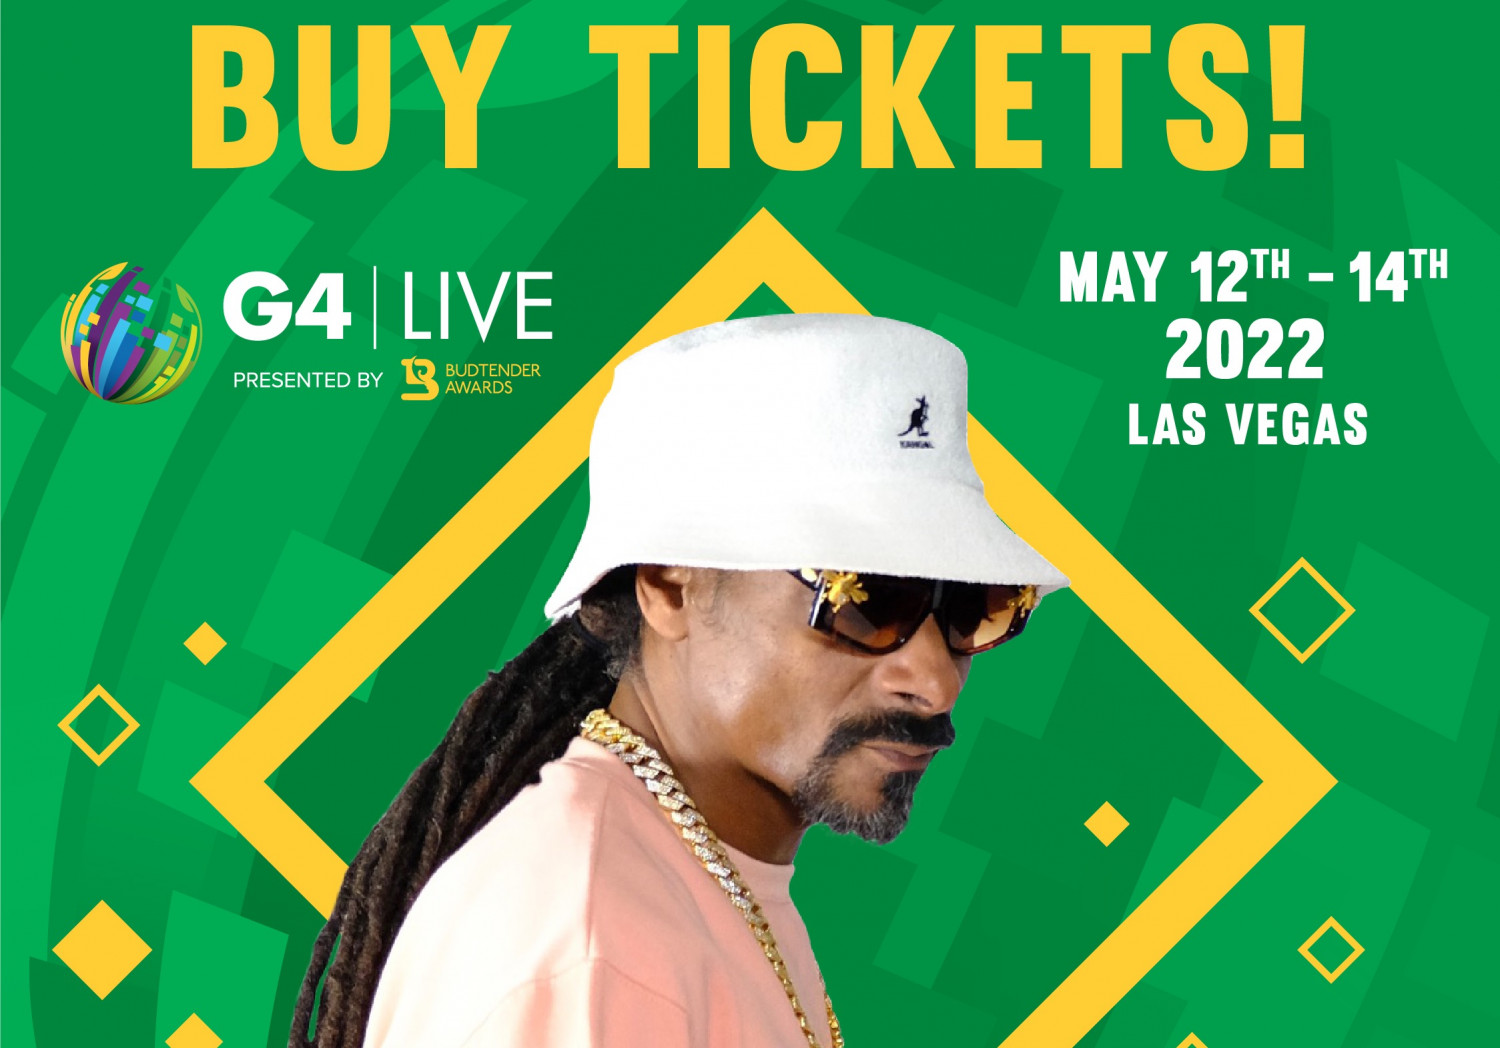 G4 Live Presented By Budtender Awards 2022 Hits Las Vegas This May